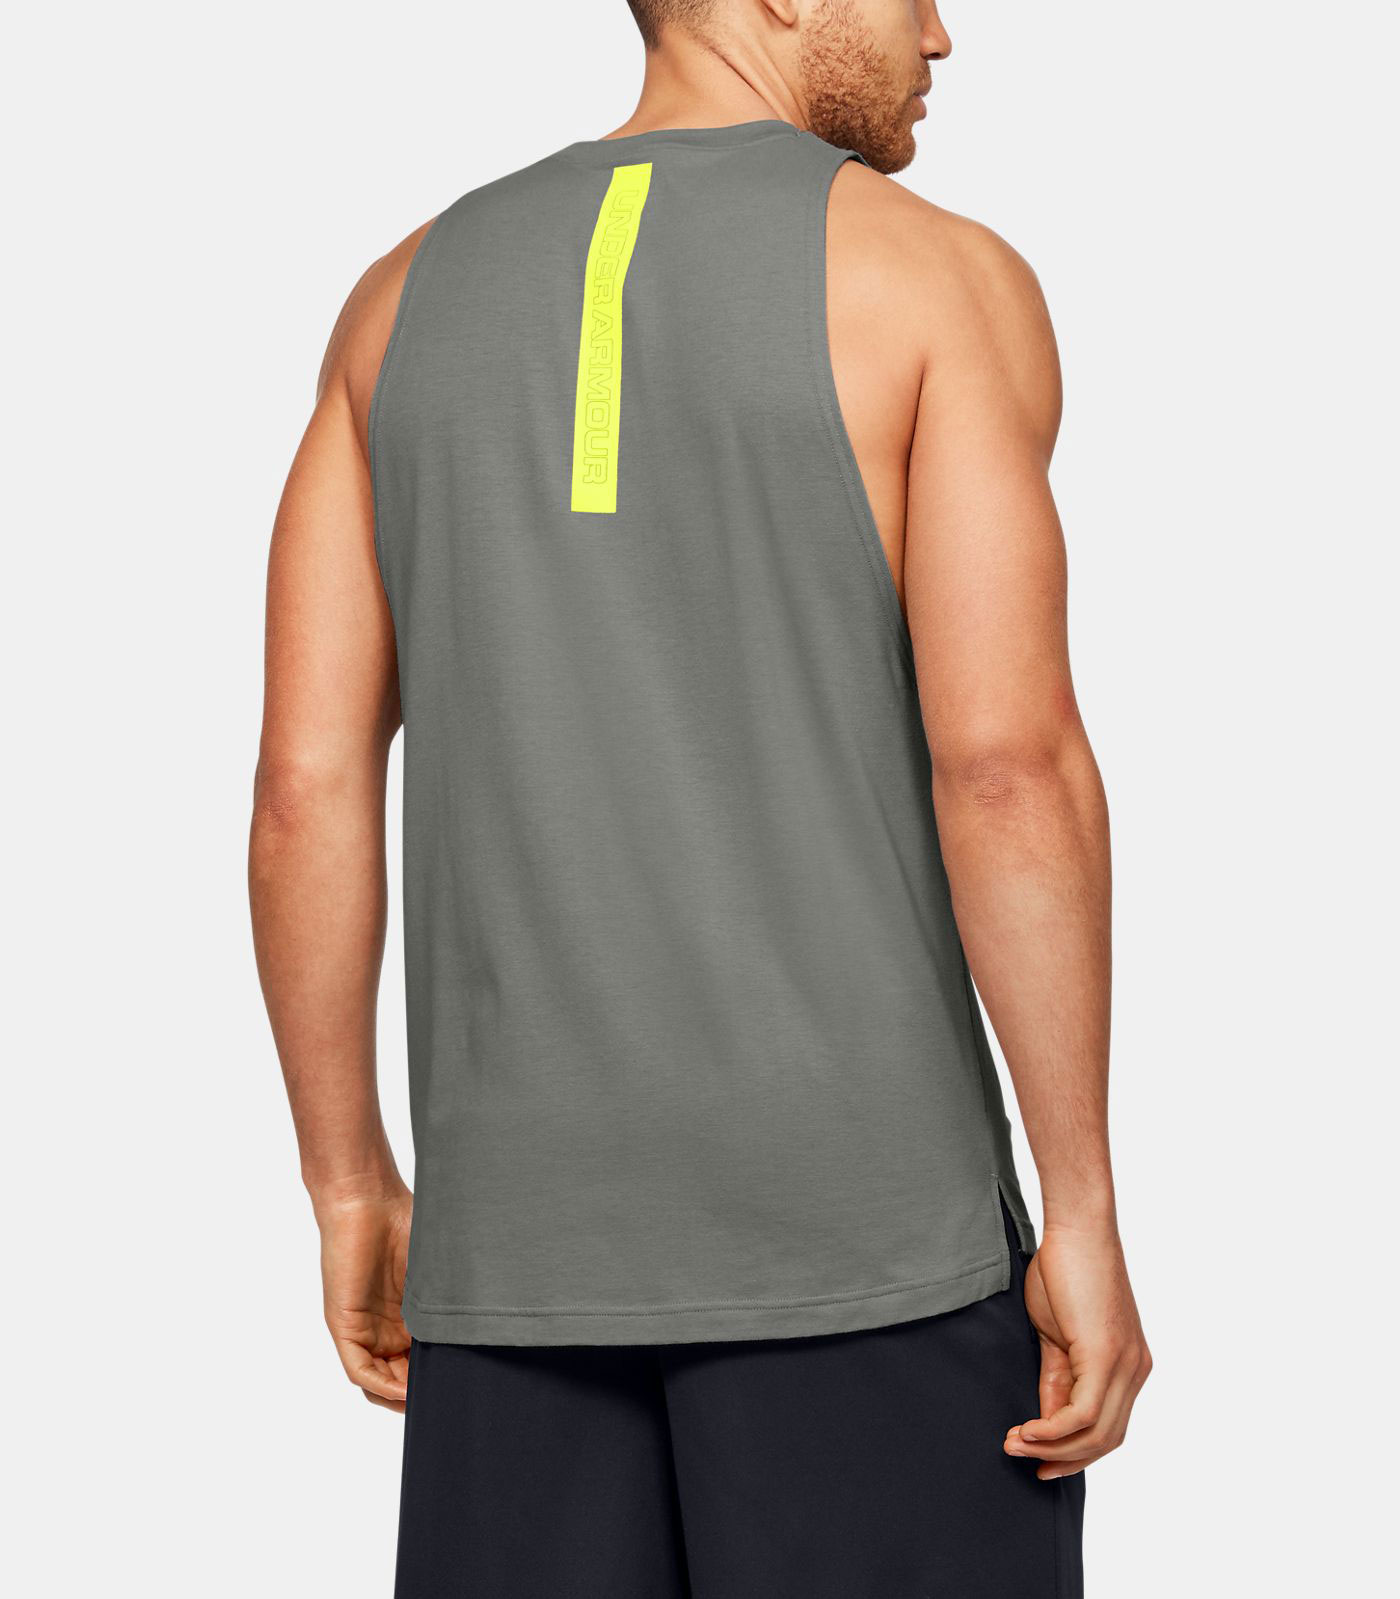 curry-7-our-history-basketball-tank-top-2